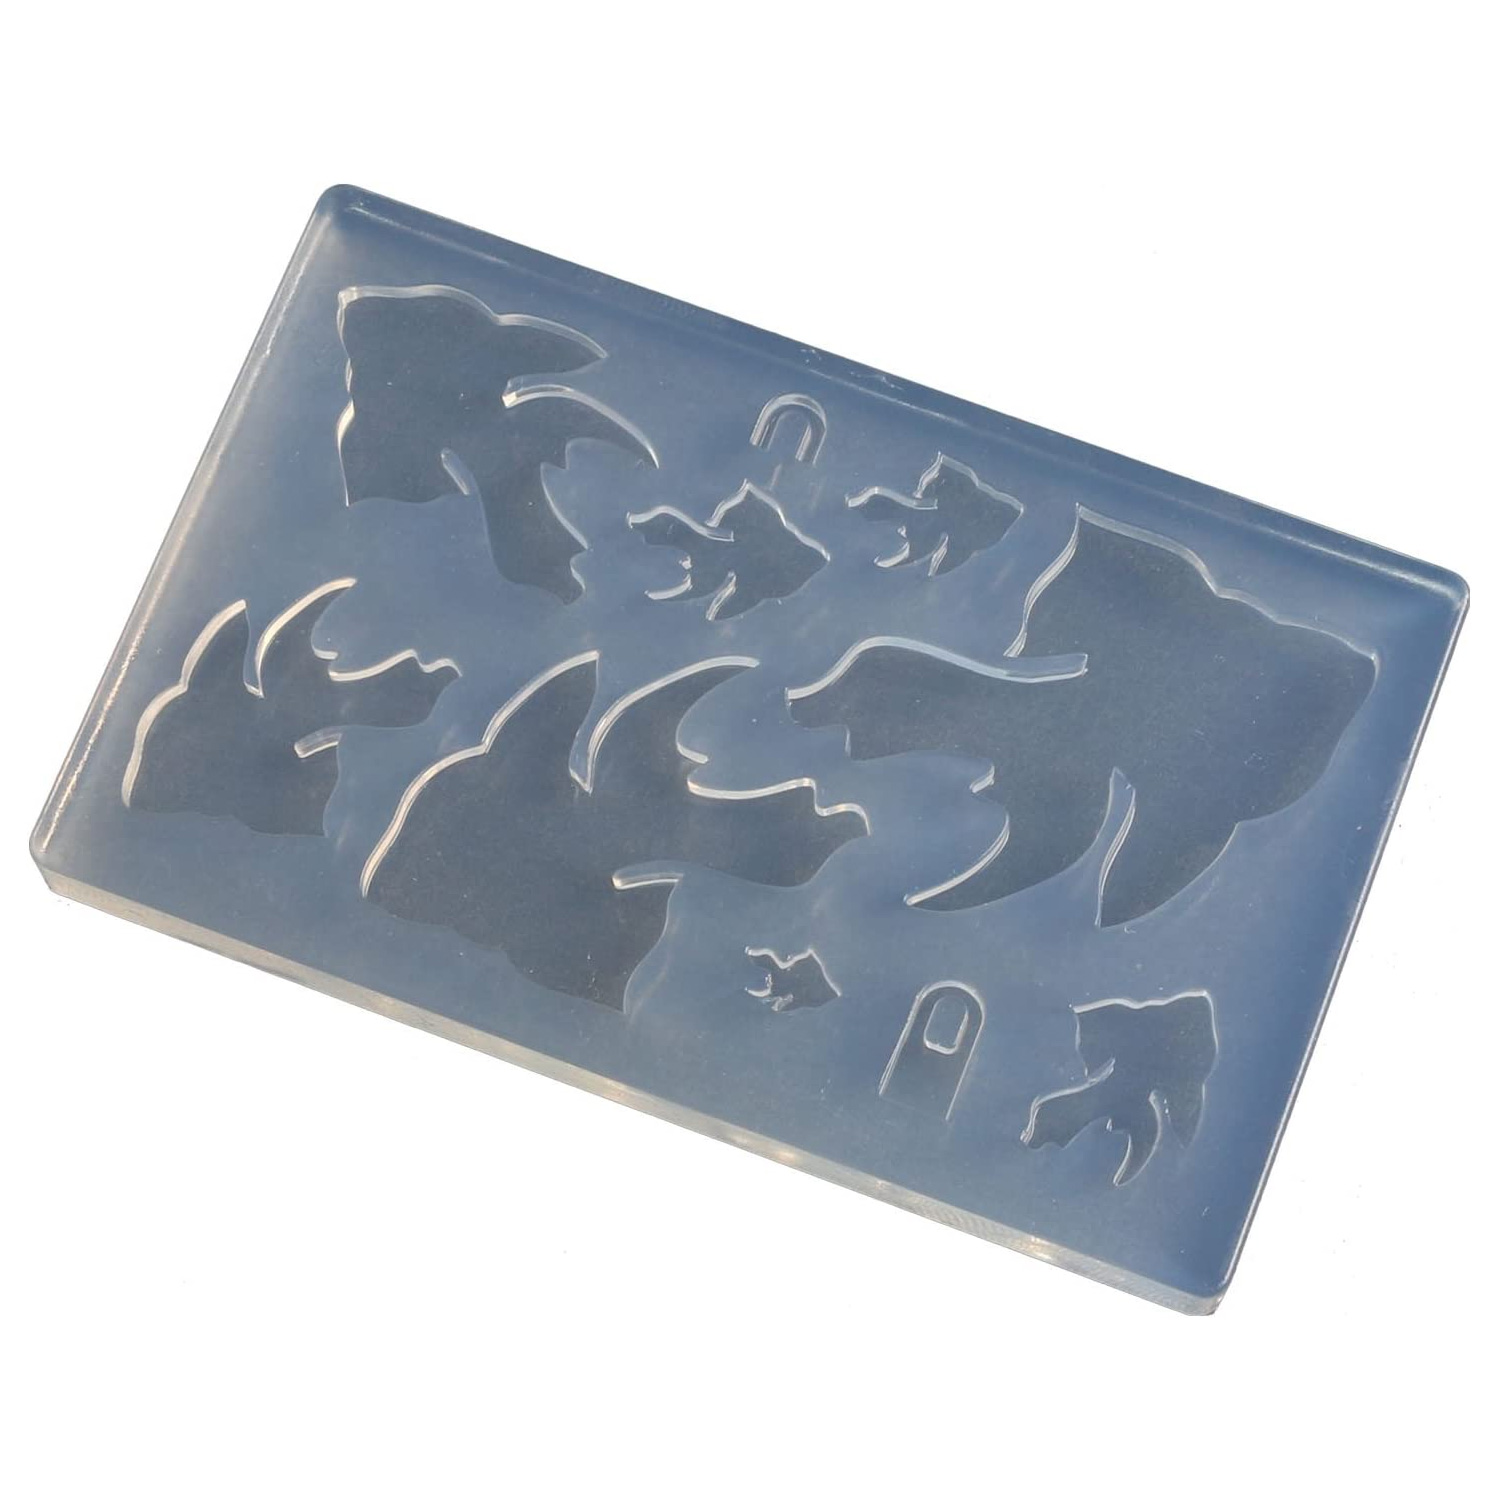 KAM-REJ-602  Resin Crafting Silicone Mold  (pcs)